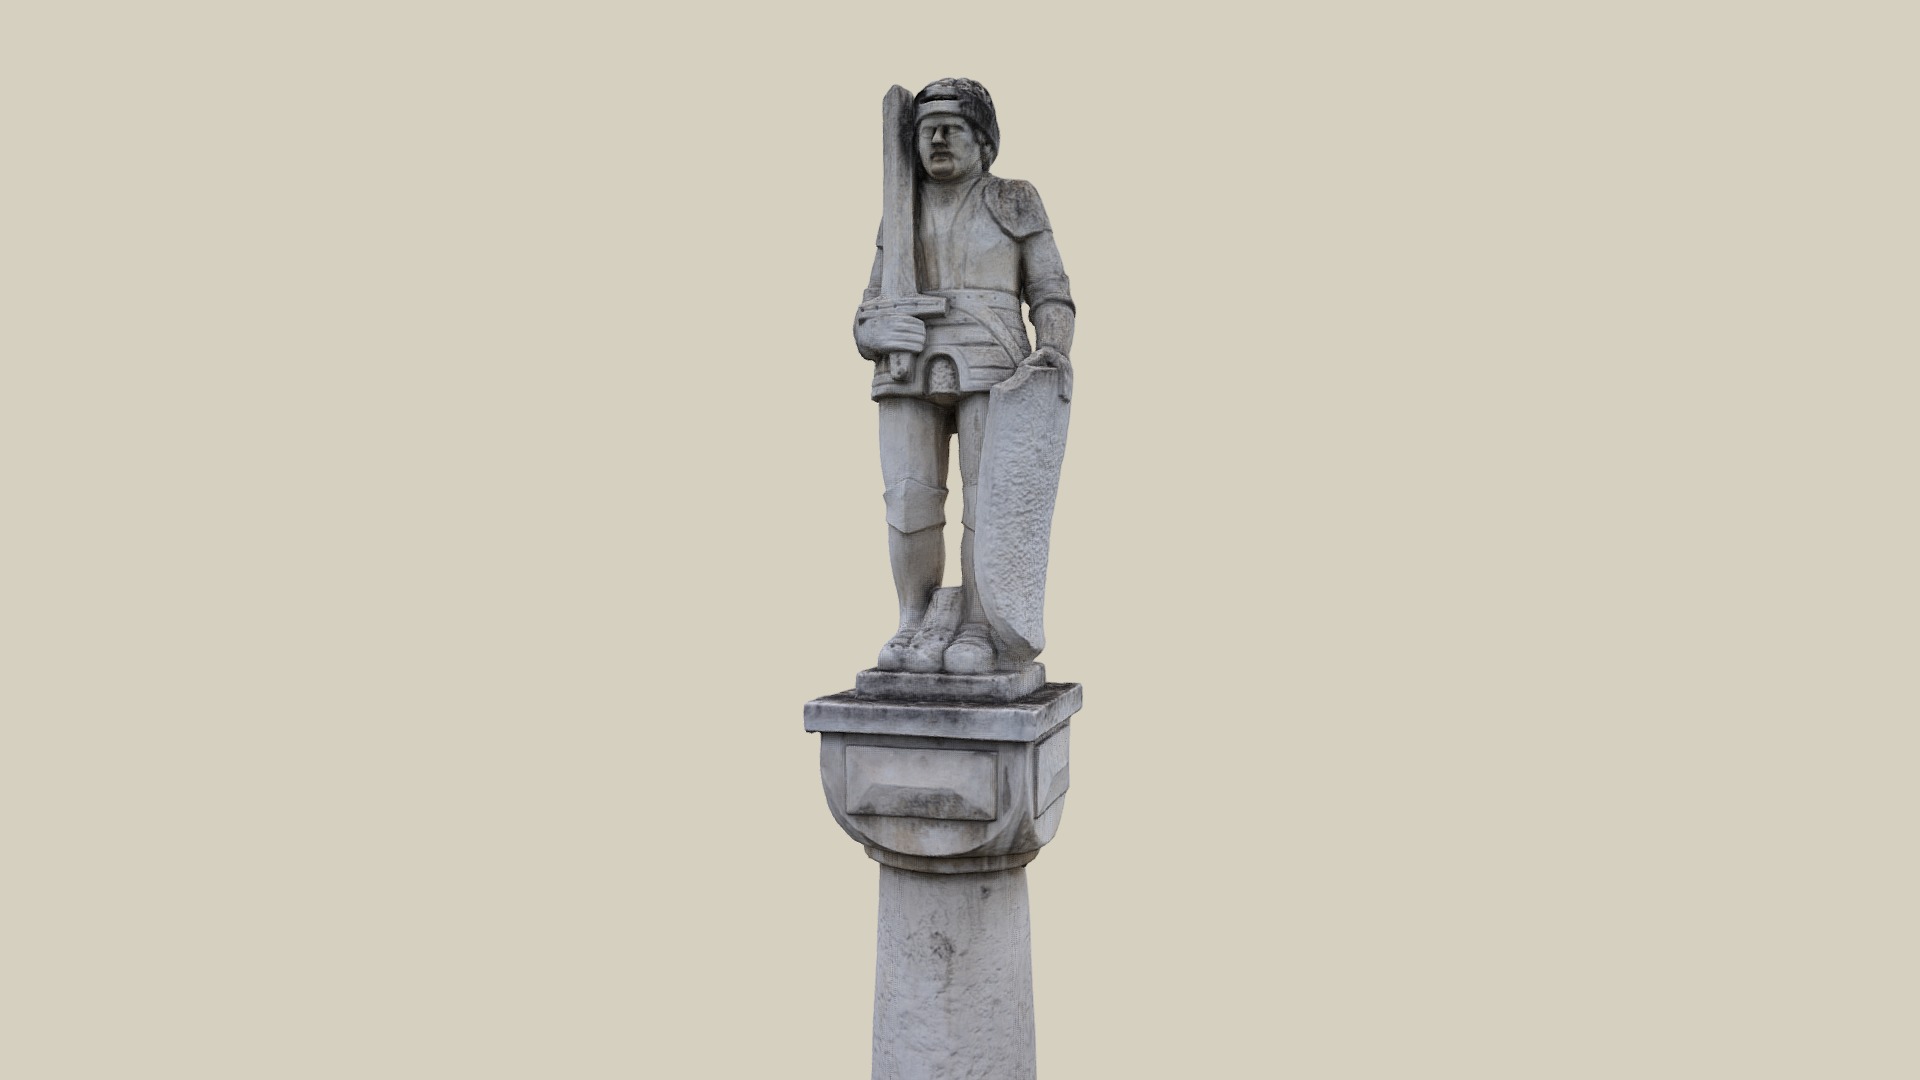 3D model Rolandsäule - This is a 3D model of the Rolandsäule. The 3D model is about a statue of a person.